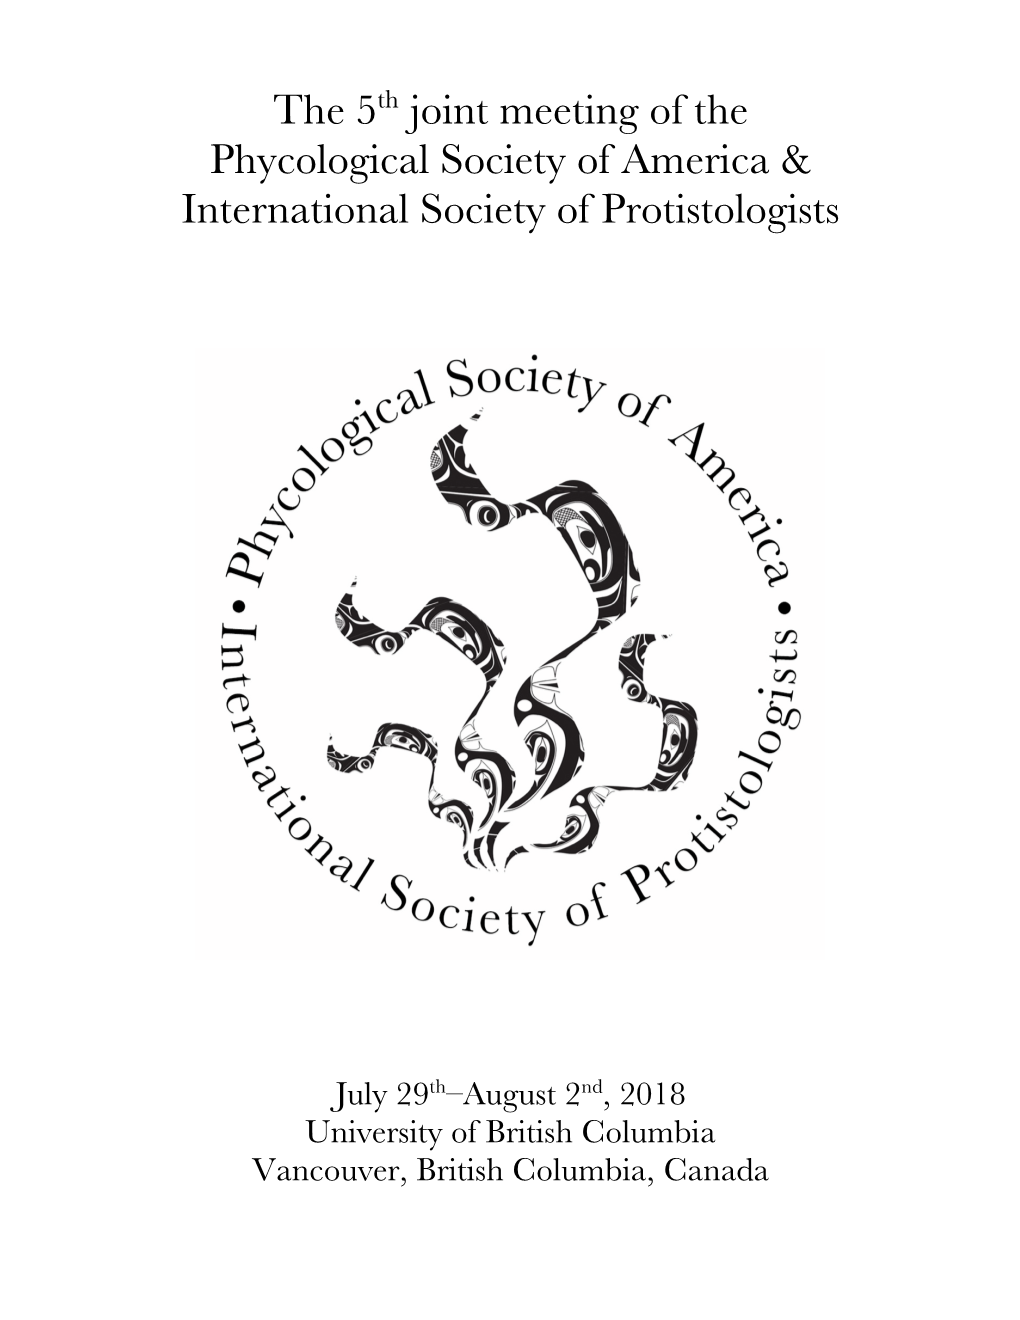 The 5Th Joint Meeting of the Phycological Society of America & International Society of Protistologists